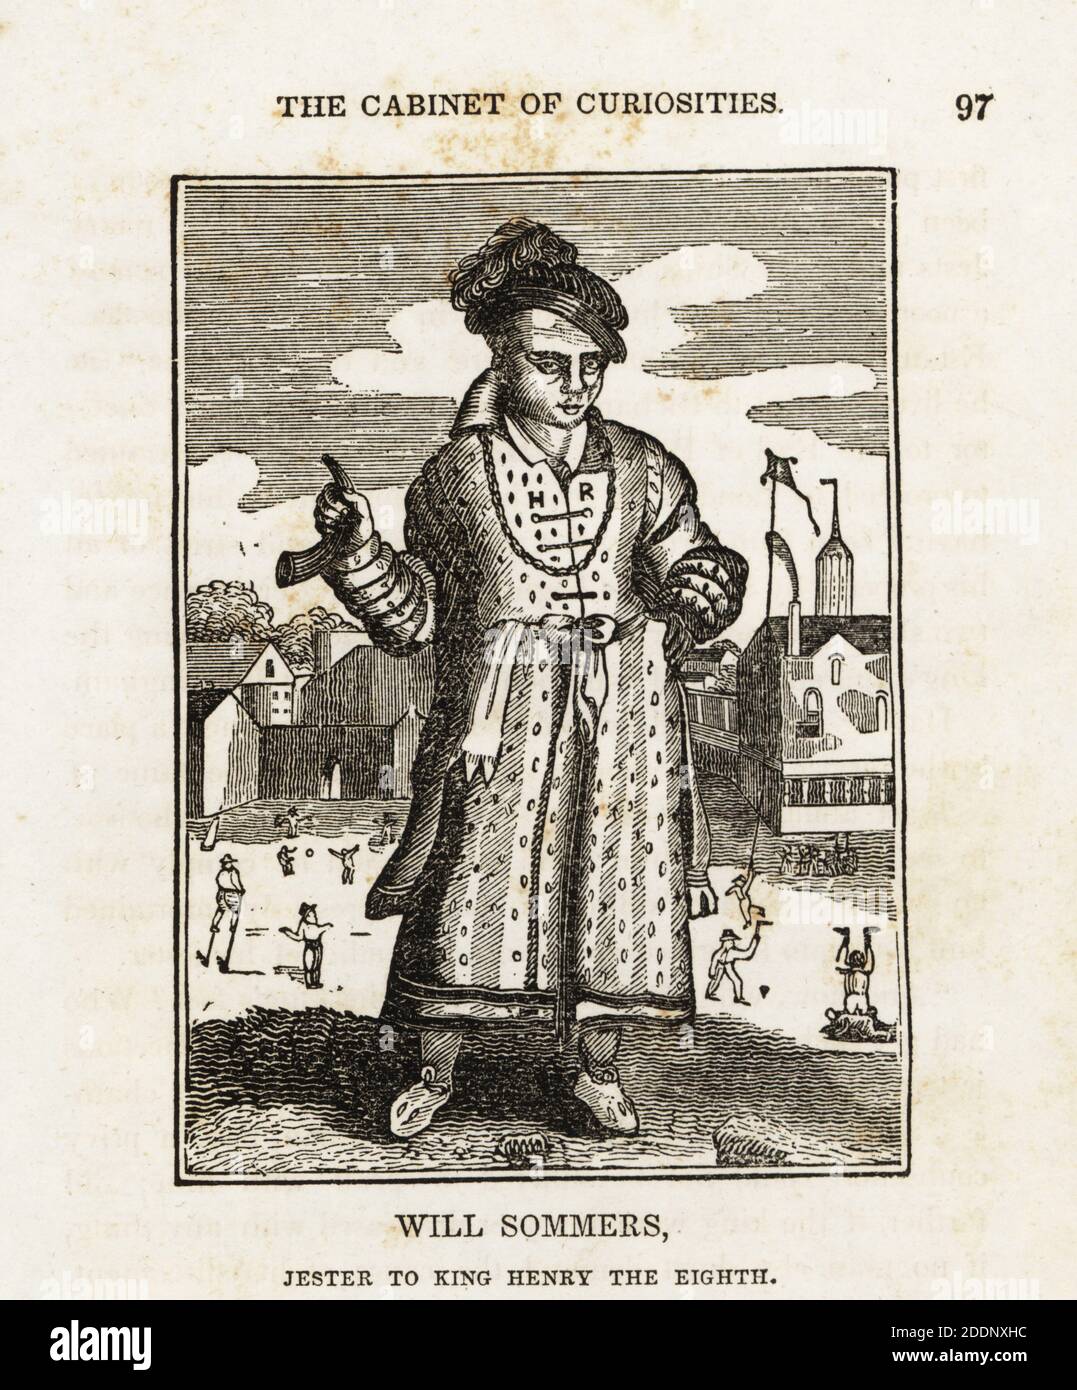 William Sommers, jester to King Henry VIII. Fool or buffoon, died 1560. In feather cap, tunic robe with HR (Henry Rex), holding a horn. Woodcut after an engraving by Francis Delaram from The Cabinet of Curiosities, or Wonders of the World Displayed, Henry Piercy, New York, 1836. Stock Photo